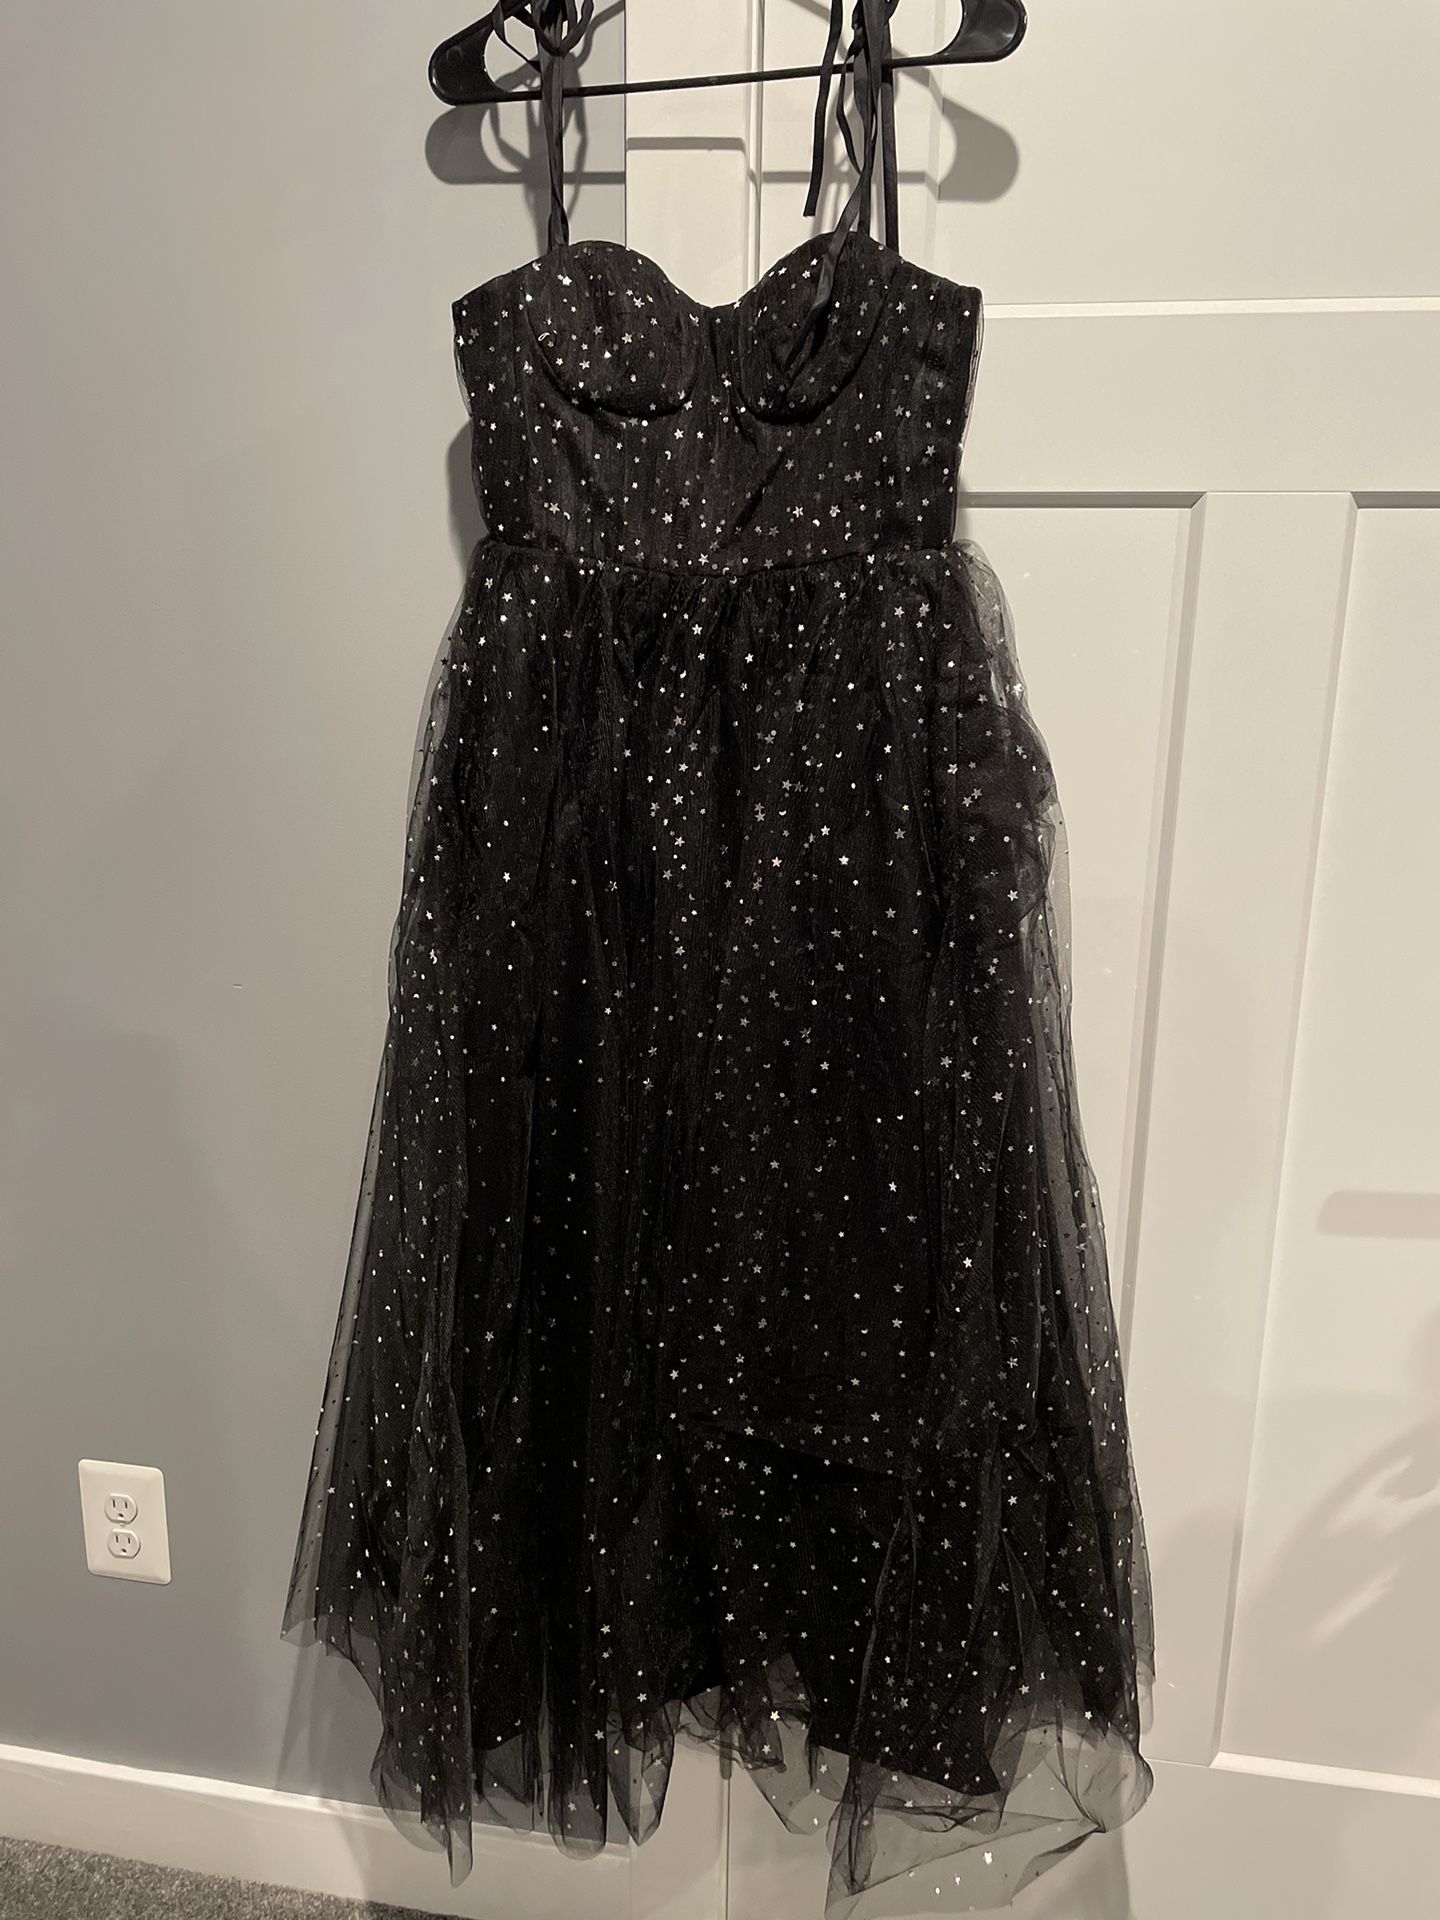 Homecoming/prom Black starry Dress Brand New. Women’s & Juniors Size Small With A Corset Back, Fully Adjustable. 